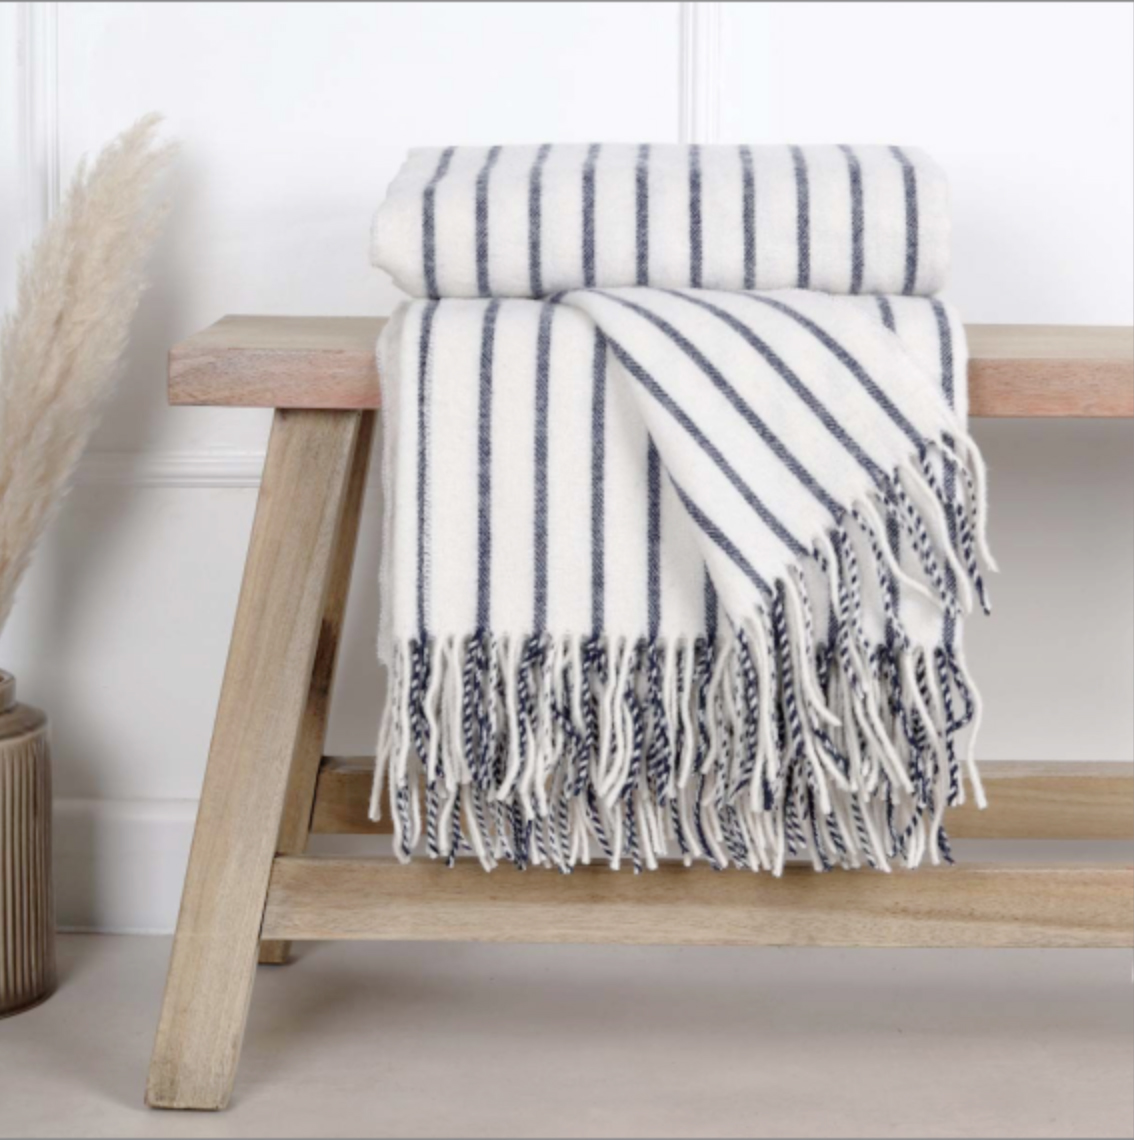 The Sudbury white and Navy blue wool throw for modern farmhouse and coastal interiors to complement our range of furniture pieces